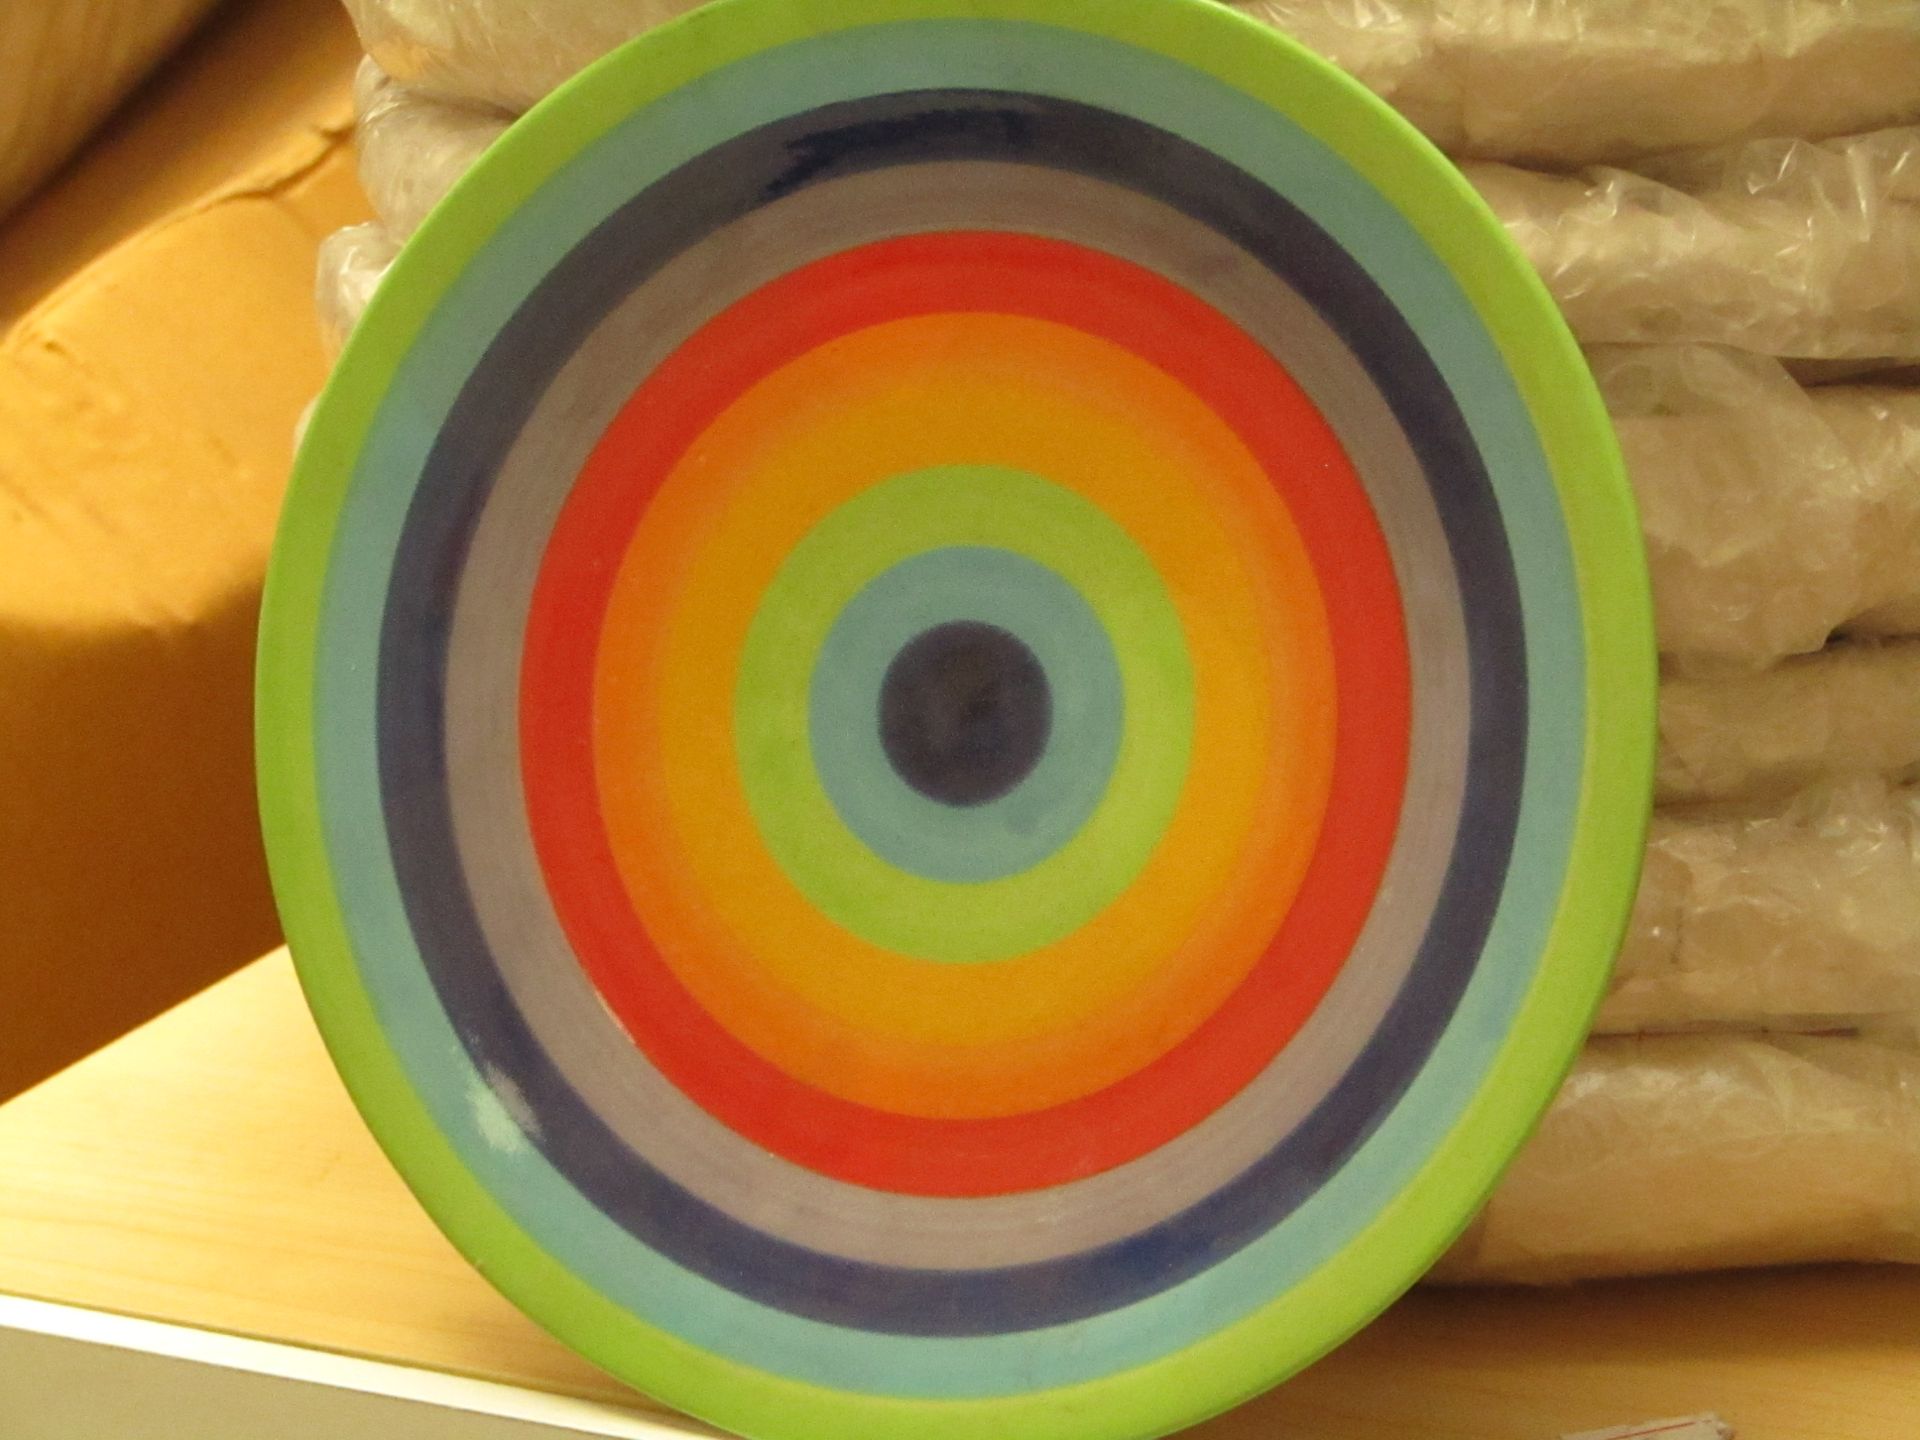 8 x Large Rainbow Design Plates. New & Packged